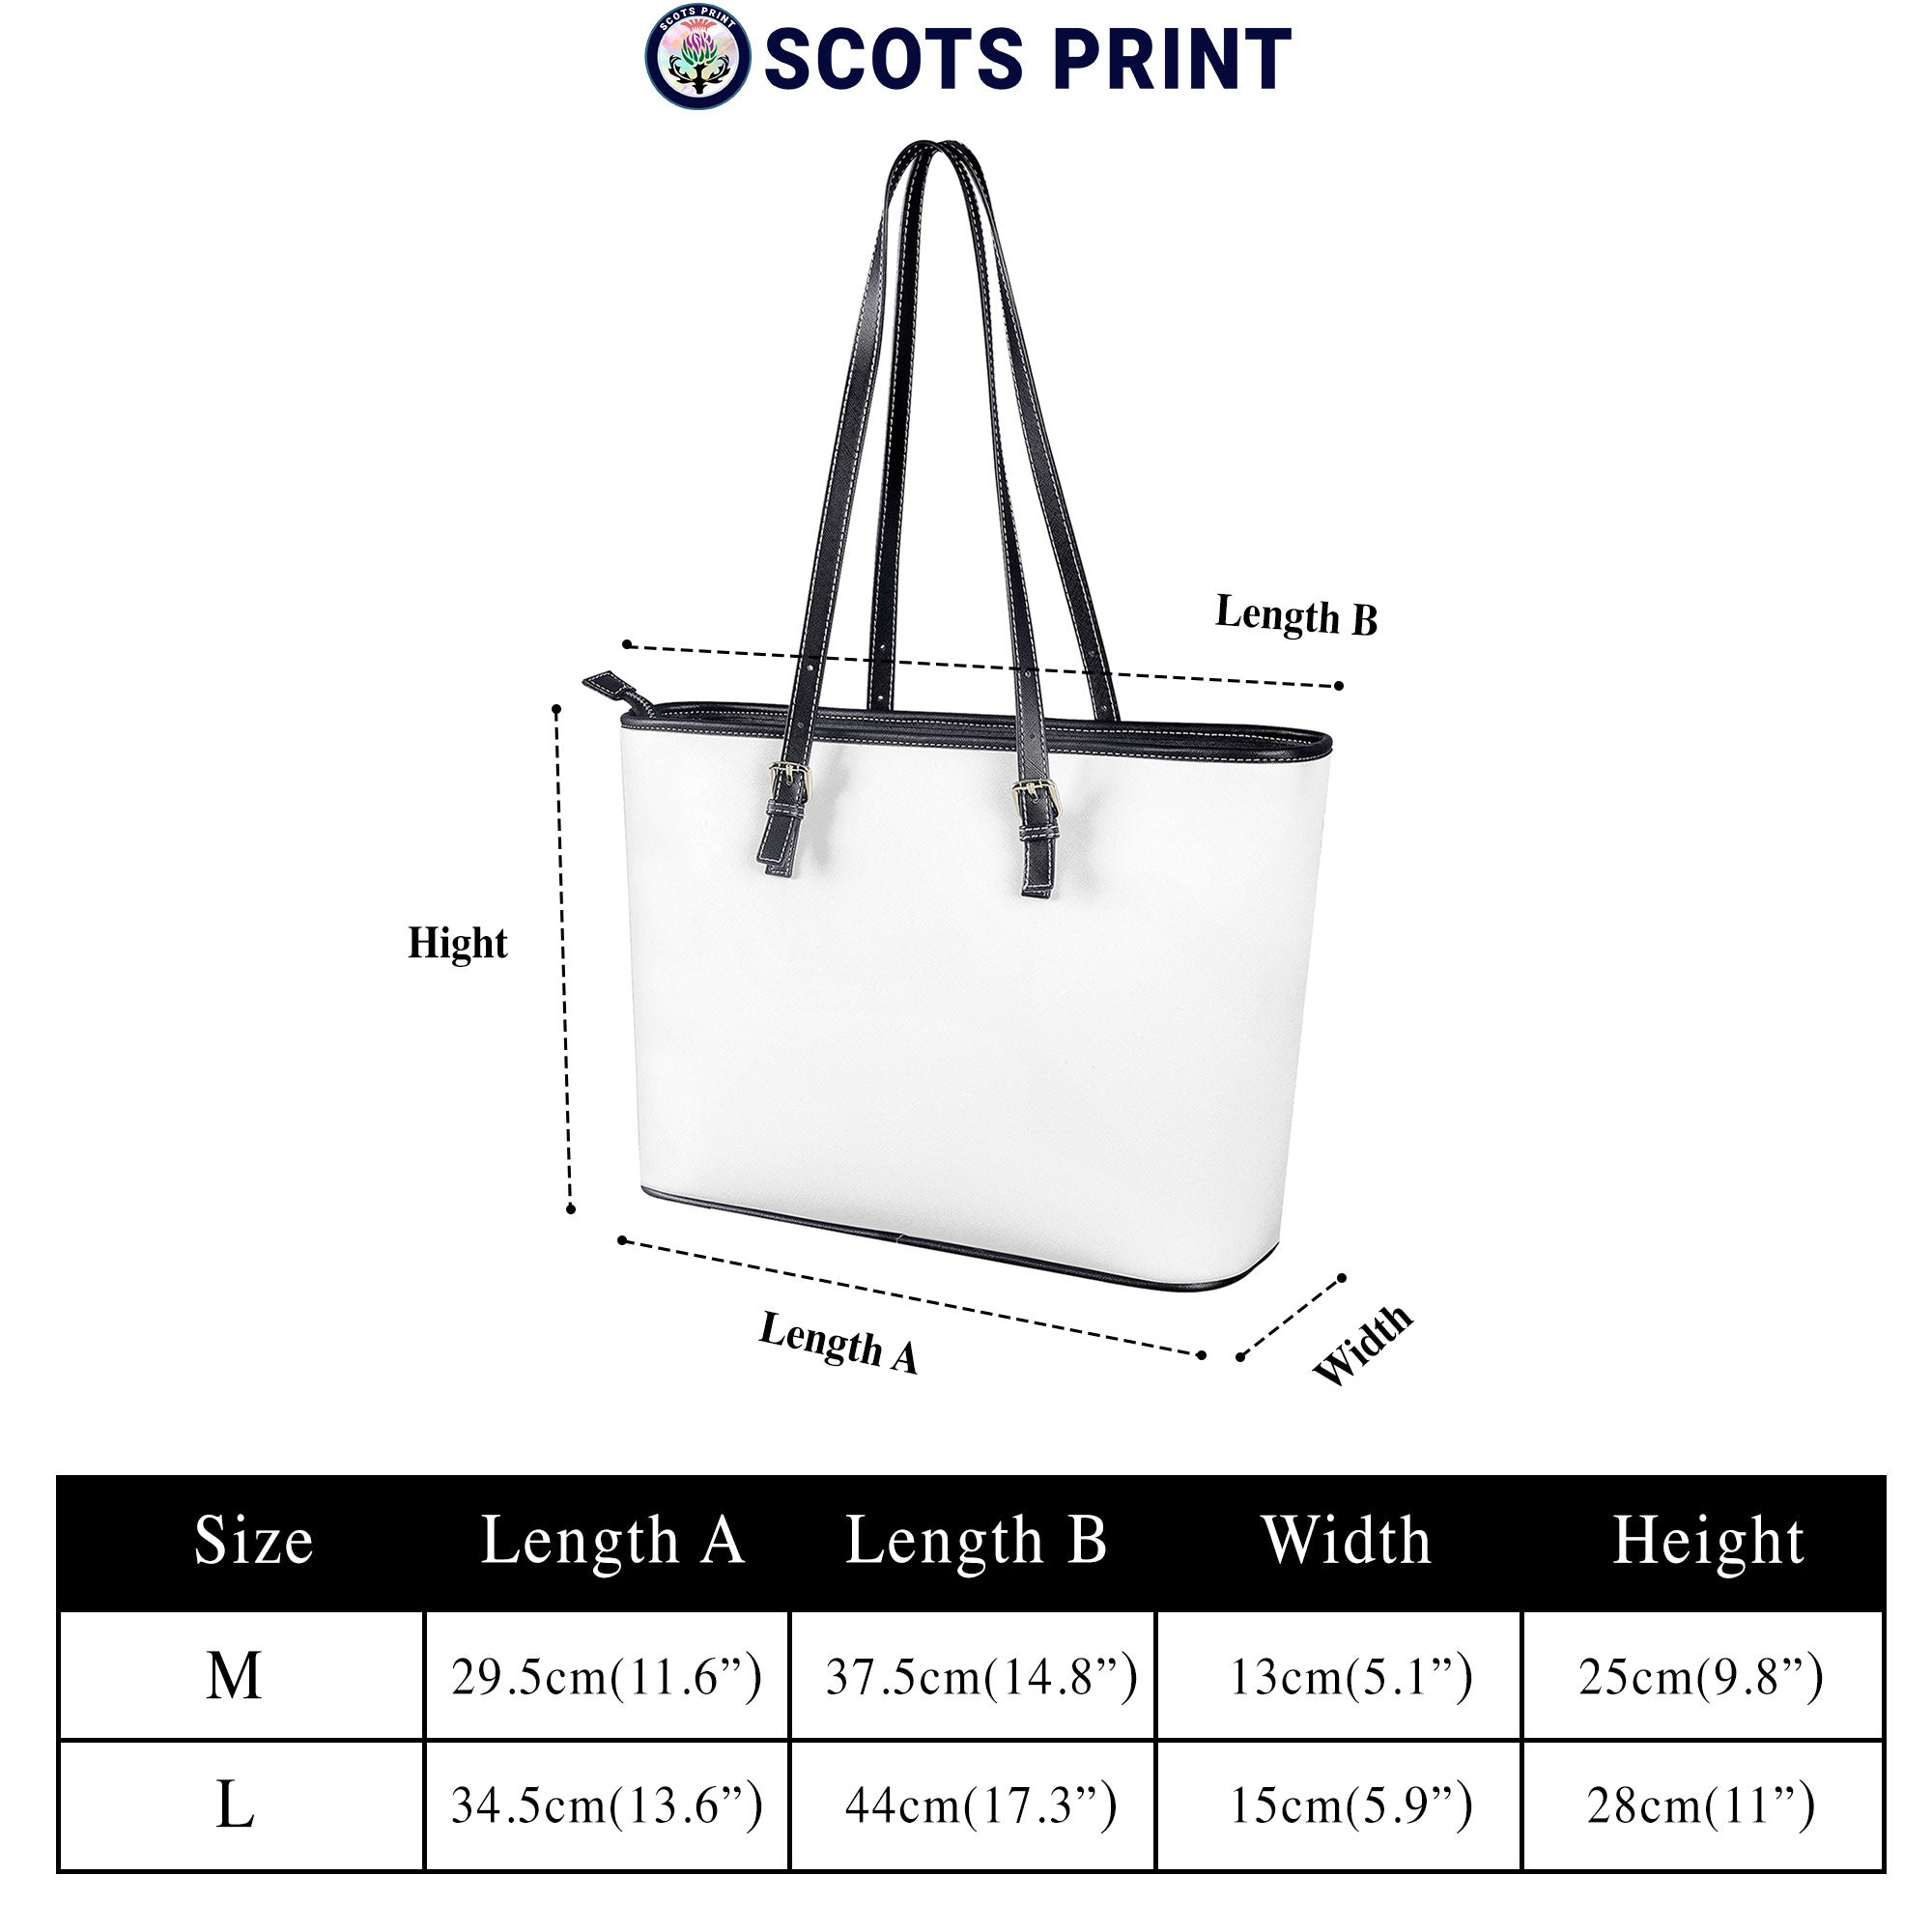 McKinlay Ancient Tartan Crest Leather Tote Bag